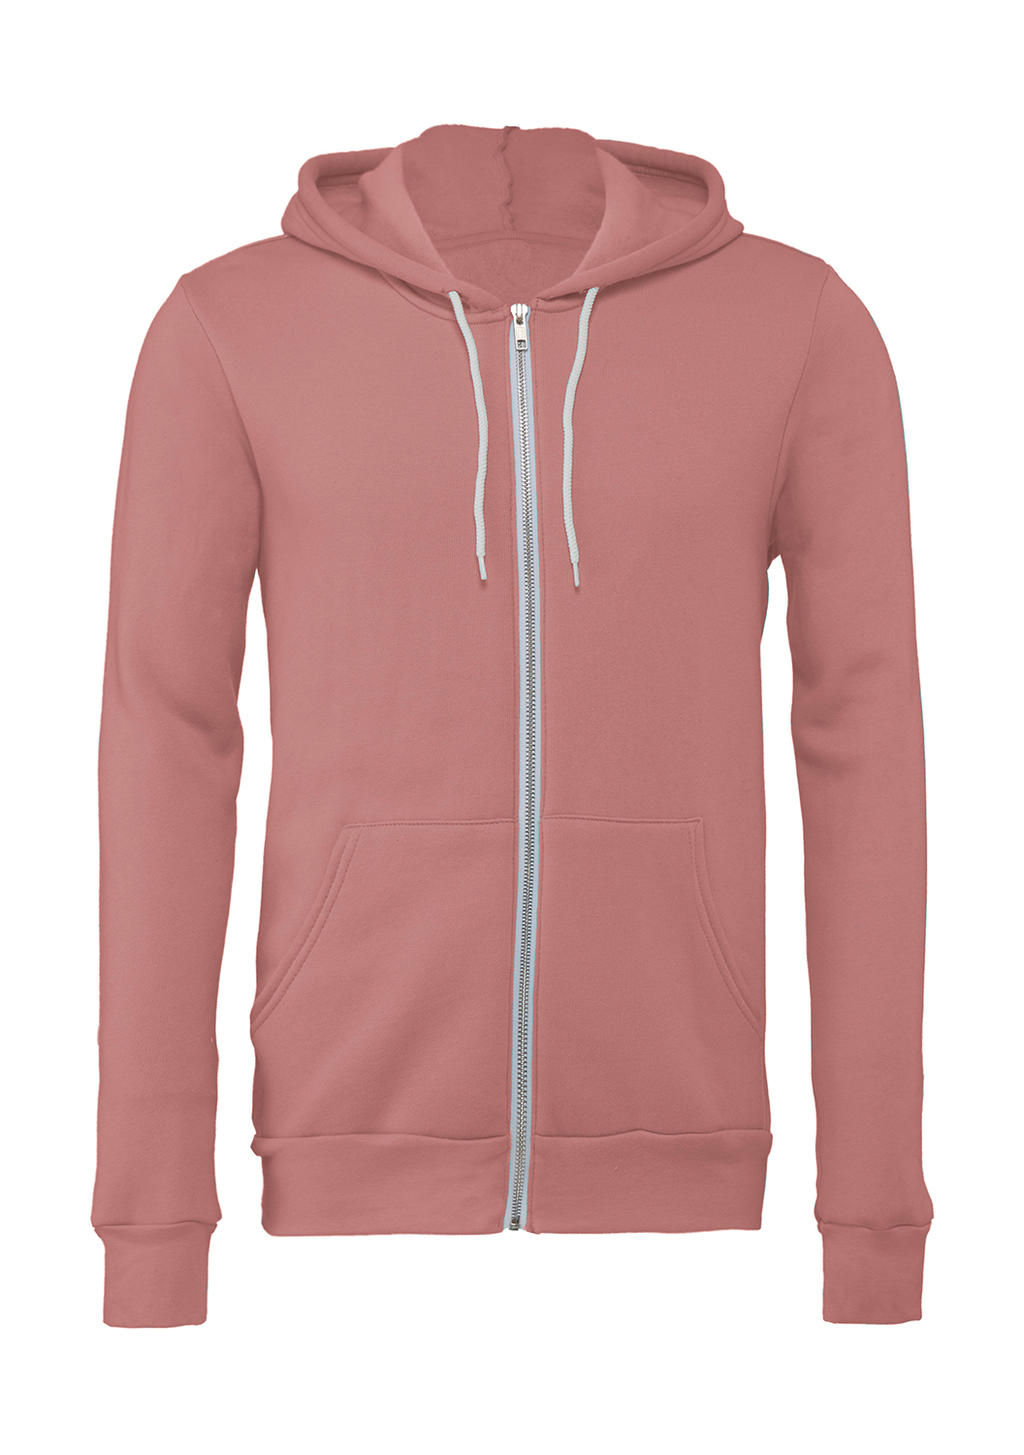  Unisex Poly-Cotton Full Zip Hoodie in Farbe Mauve